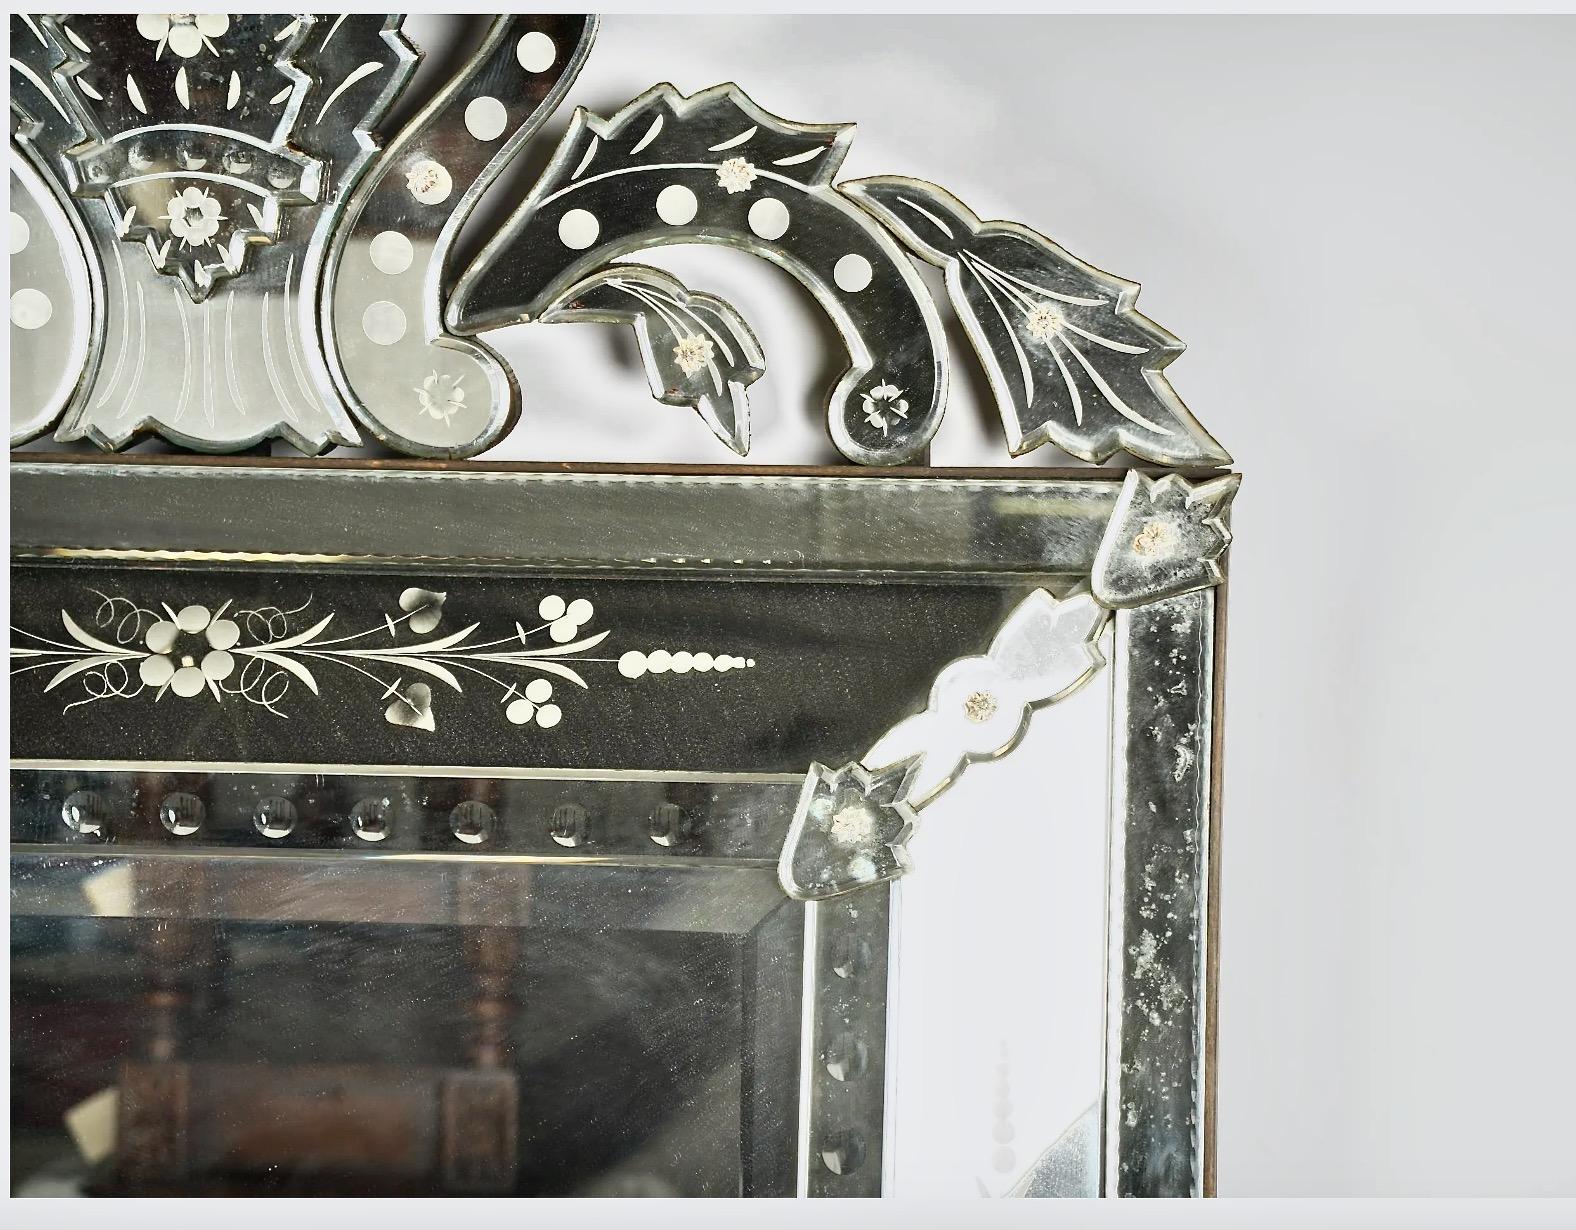 This is a large impressive Venetian mirror that dates to c. 1950-1960. The frame consists of multiple etched and carved mirrored elements and is in overall very good condition.